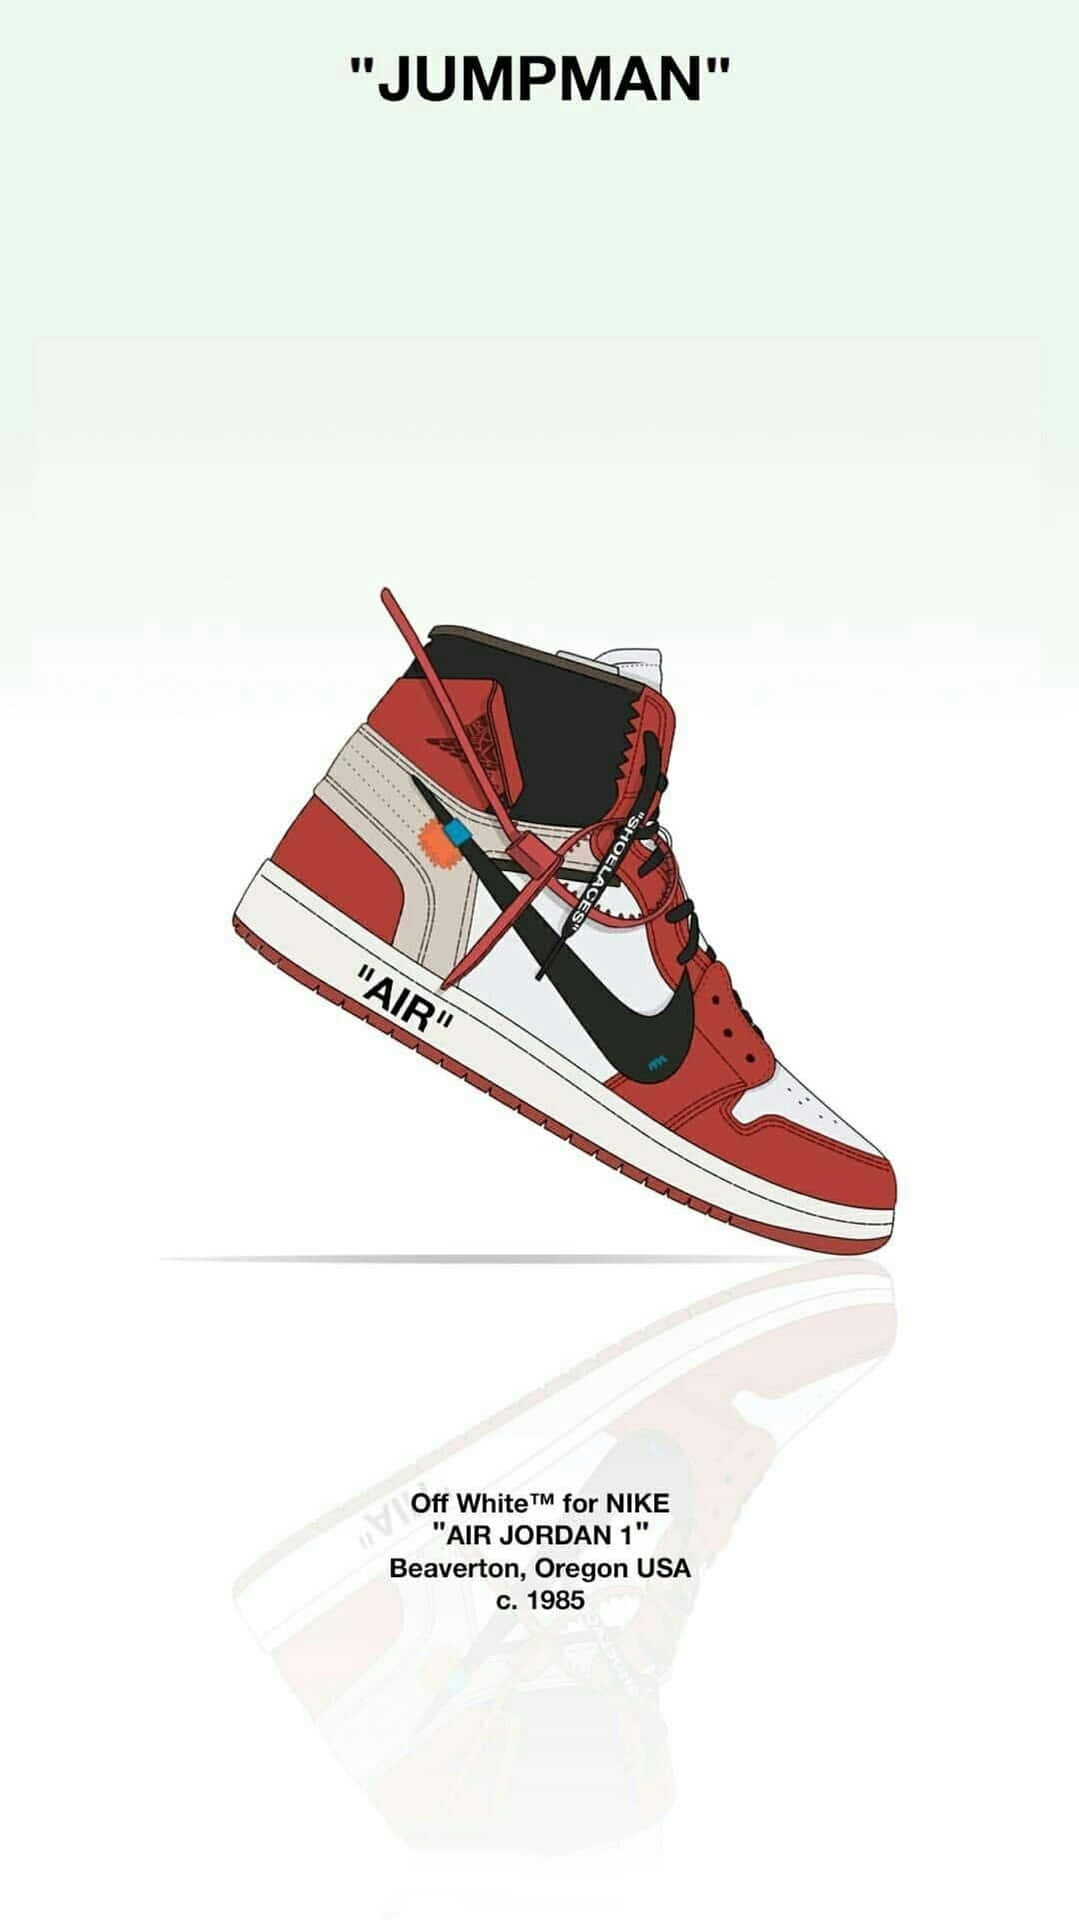 The revolutionary Off White Jordan 1 shoes, designed to deliver both style and comfort. Wallpaper